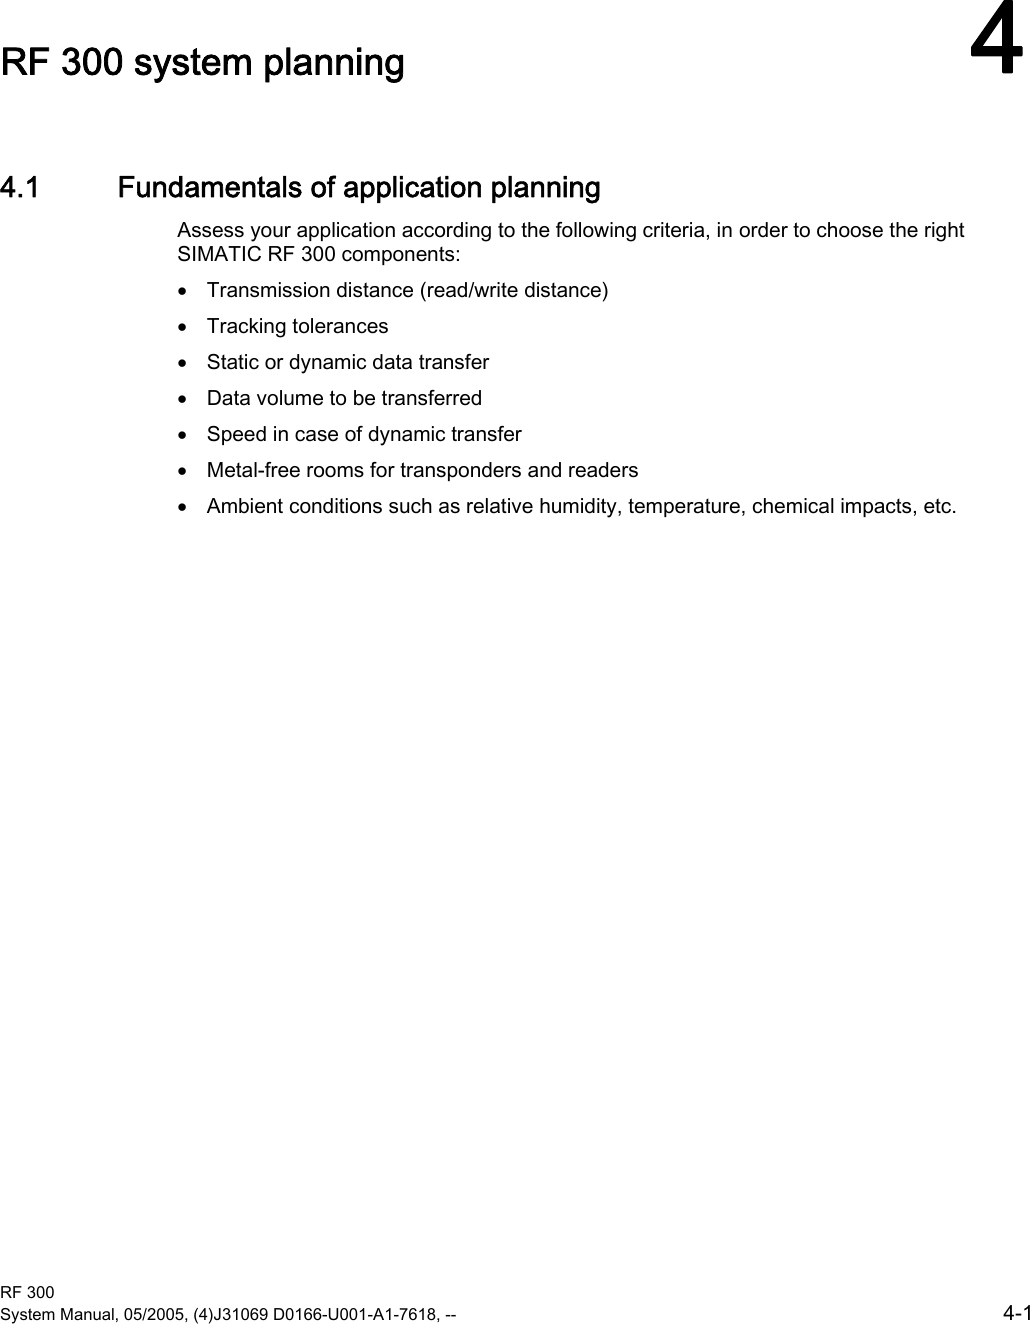  RF 300 System Manual, 05/2005, (4)J31069 D0166-U001-A1-7618, --  4-1 RF 300 system planning  44.1  4.1 Fundamentals of application planning Assess your application according to the following criteria, in order to choose the right SIMATIC RF 300 components:  •  Transmission distance (read/write distance) •  Tracking tolerances •  Static or dynamic data transfer •  Data volume to be transferred •  Speed in case of dynamic transfer •  Metal-free rooms for transponders and readers •  Ambient conditions such as relative humidity, temperature, chemical impacts, etc. 